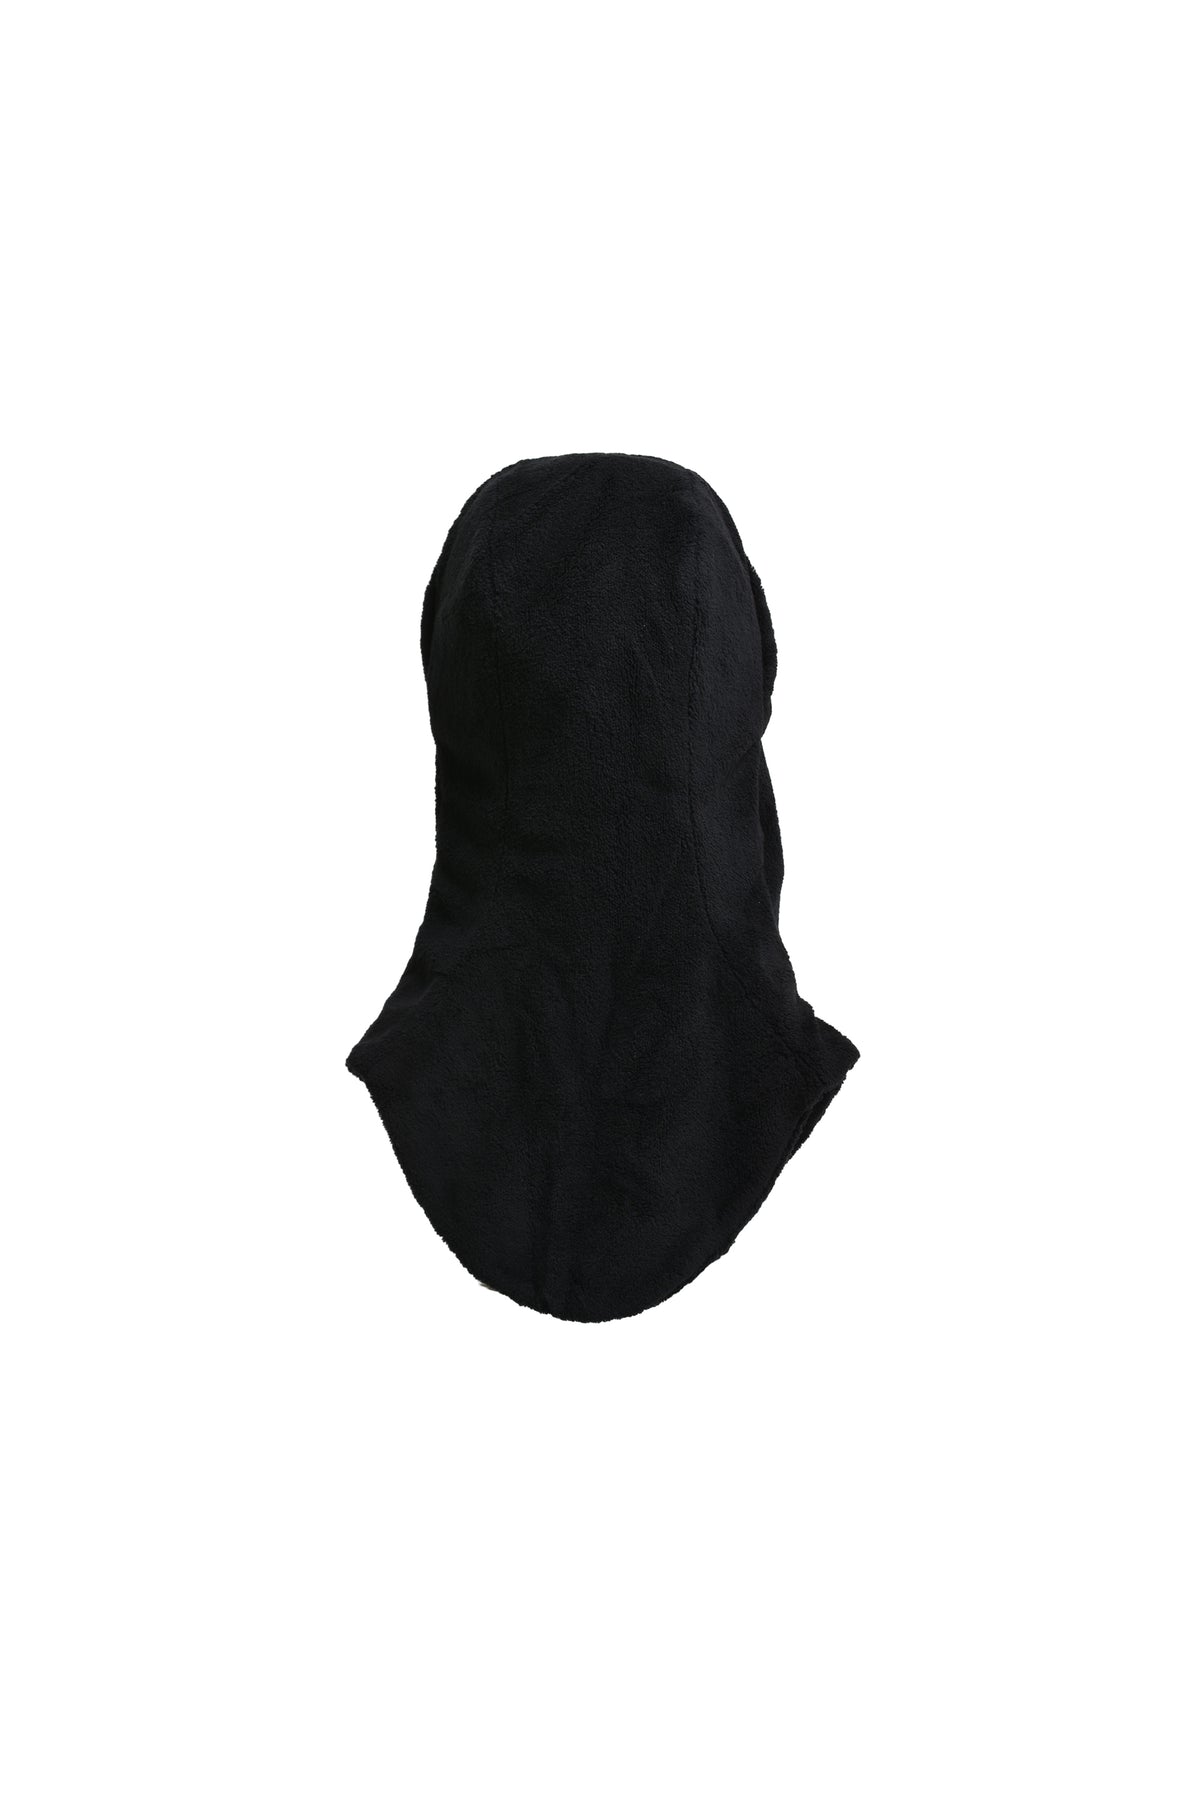 POST ARCHIVE FACTION (PAF) 5.1 BALACLAVA RIGHT / BLK